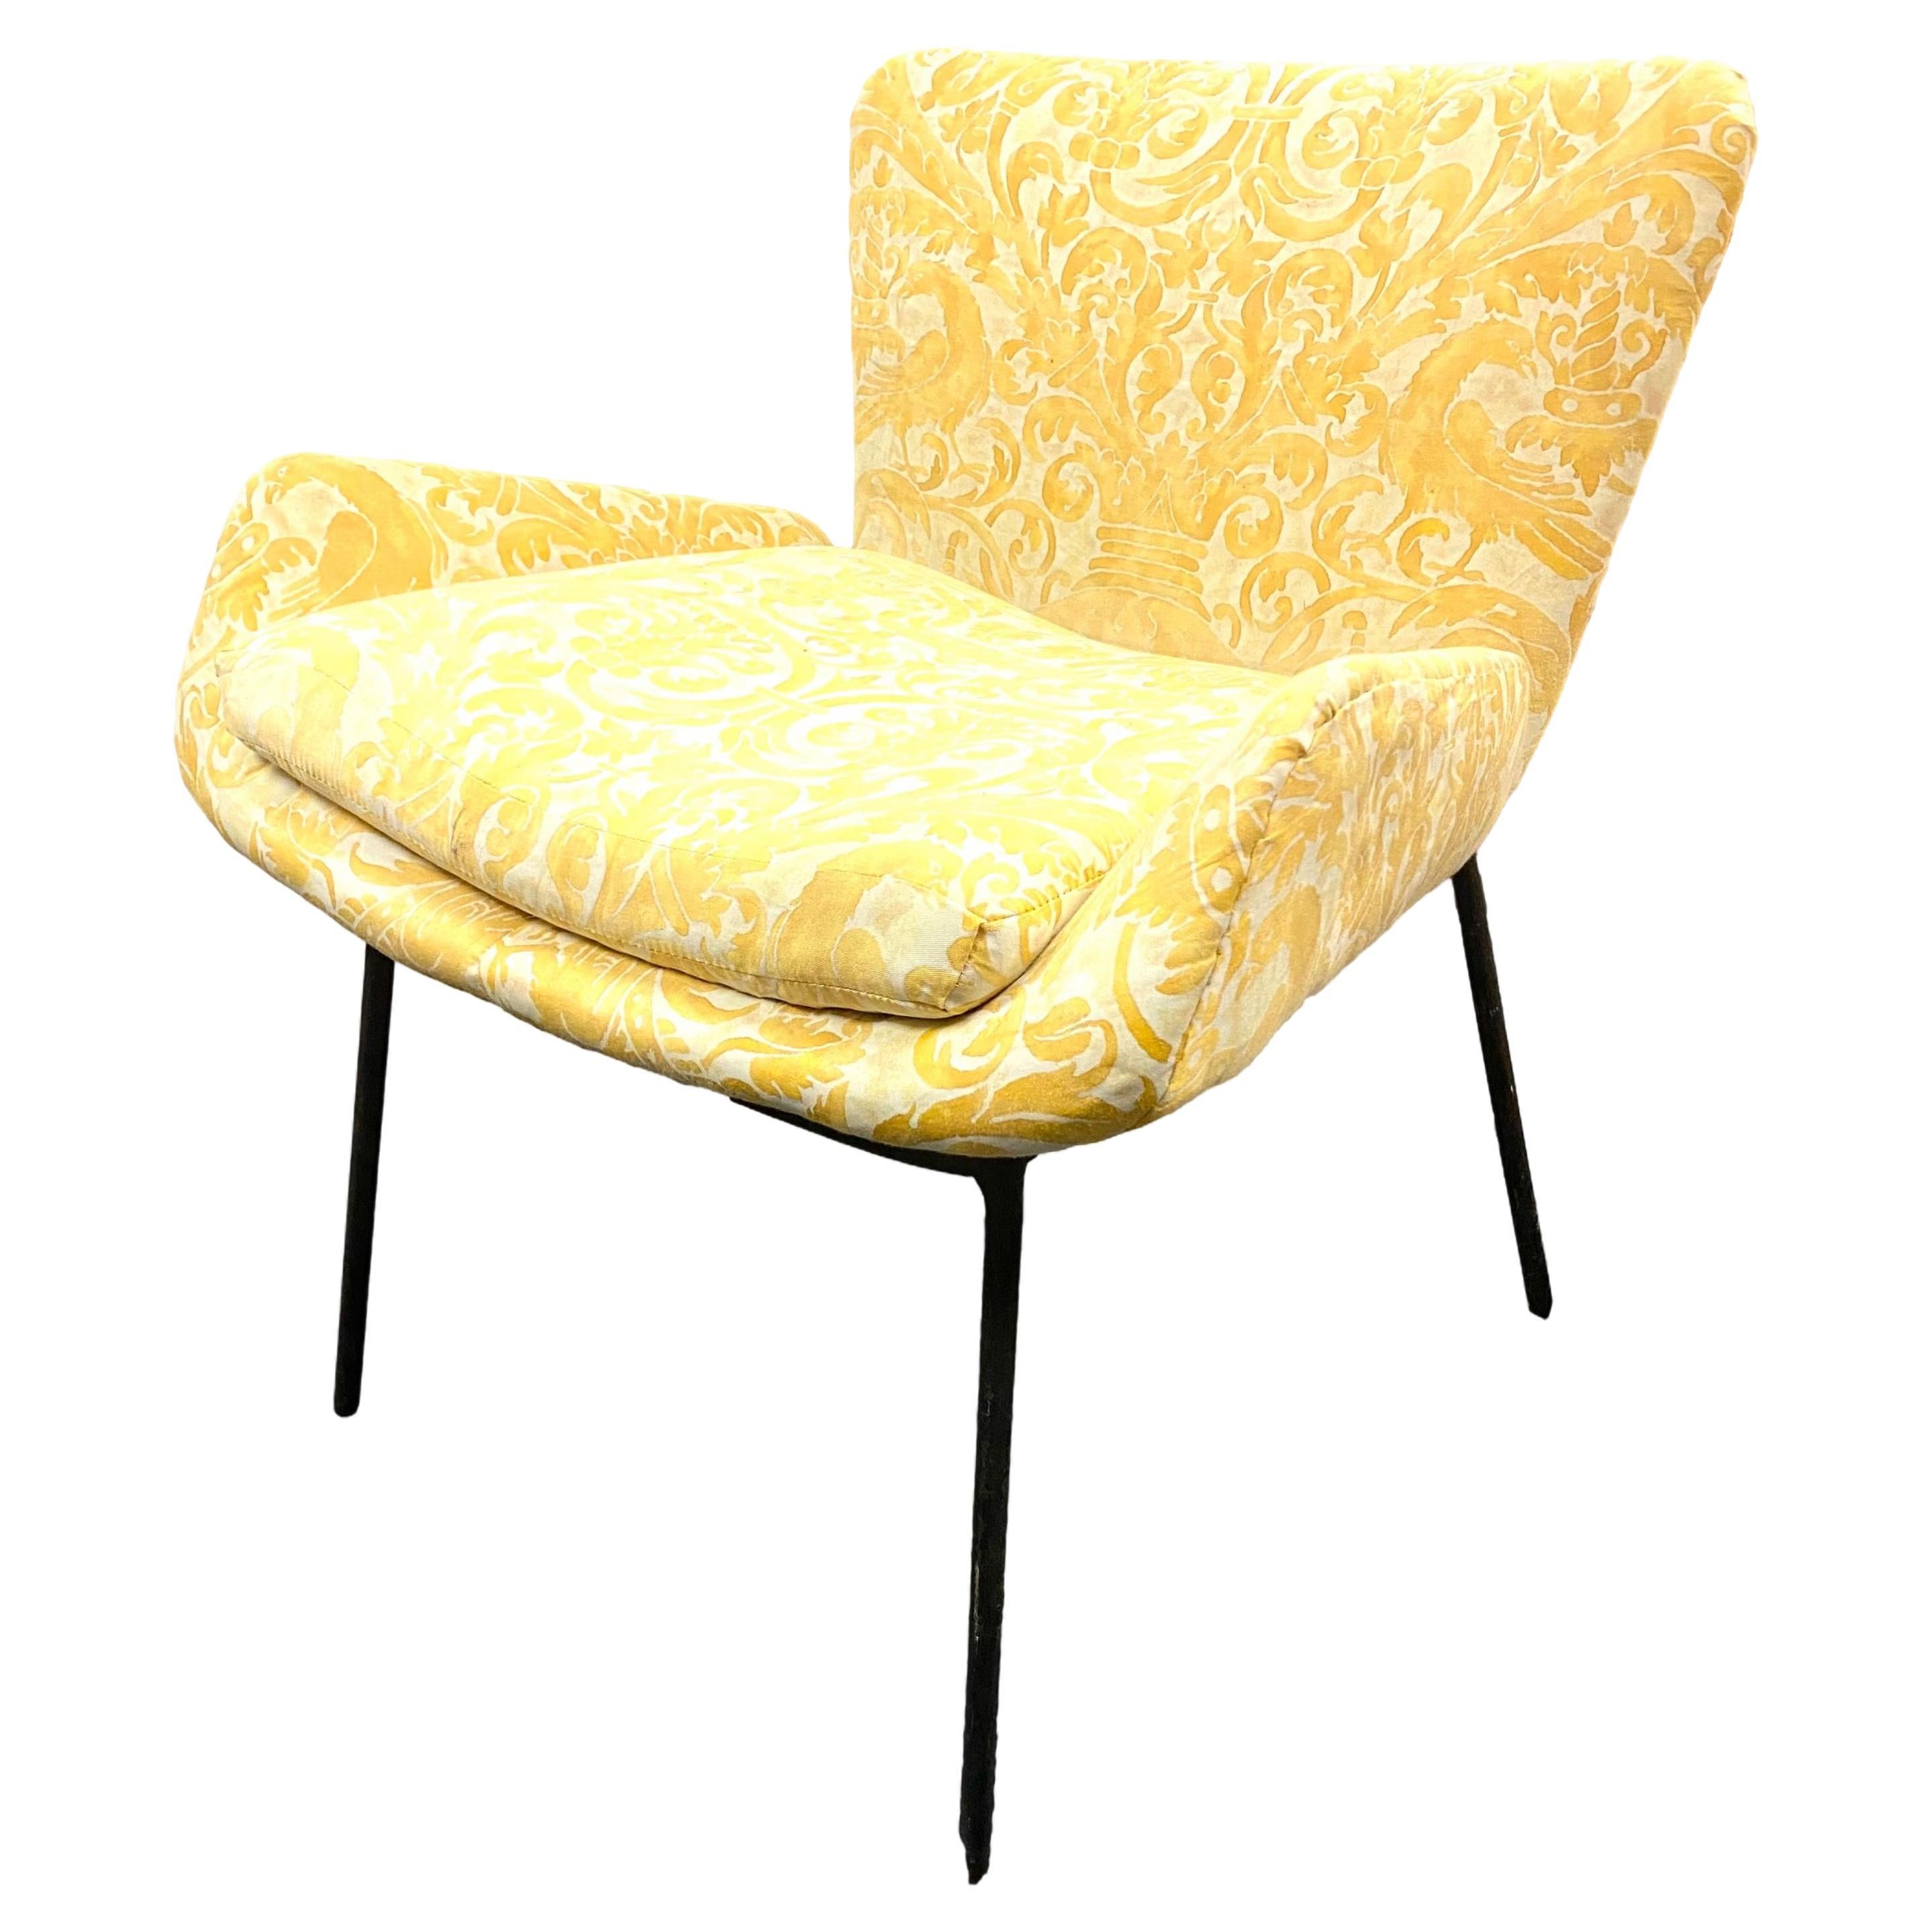 Italian Side Chair with Fortuny Upholstery